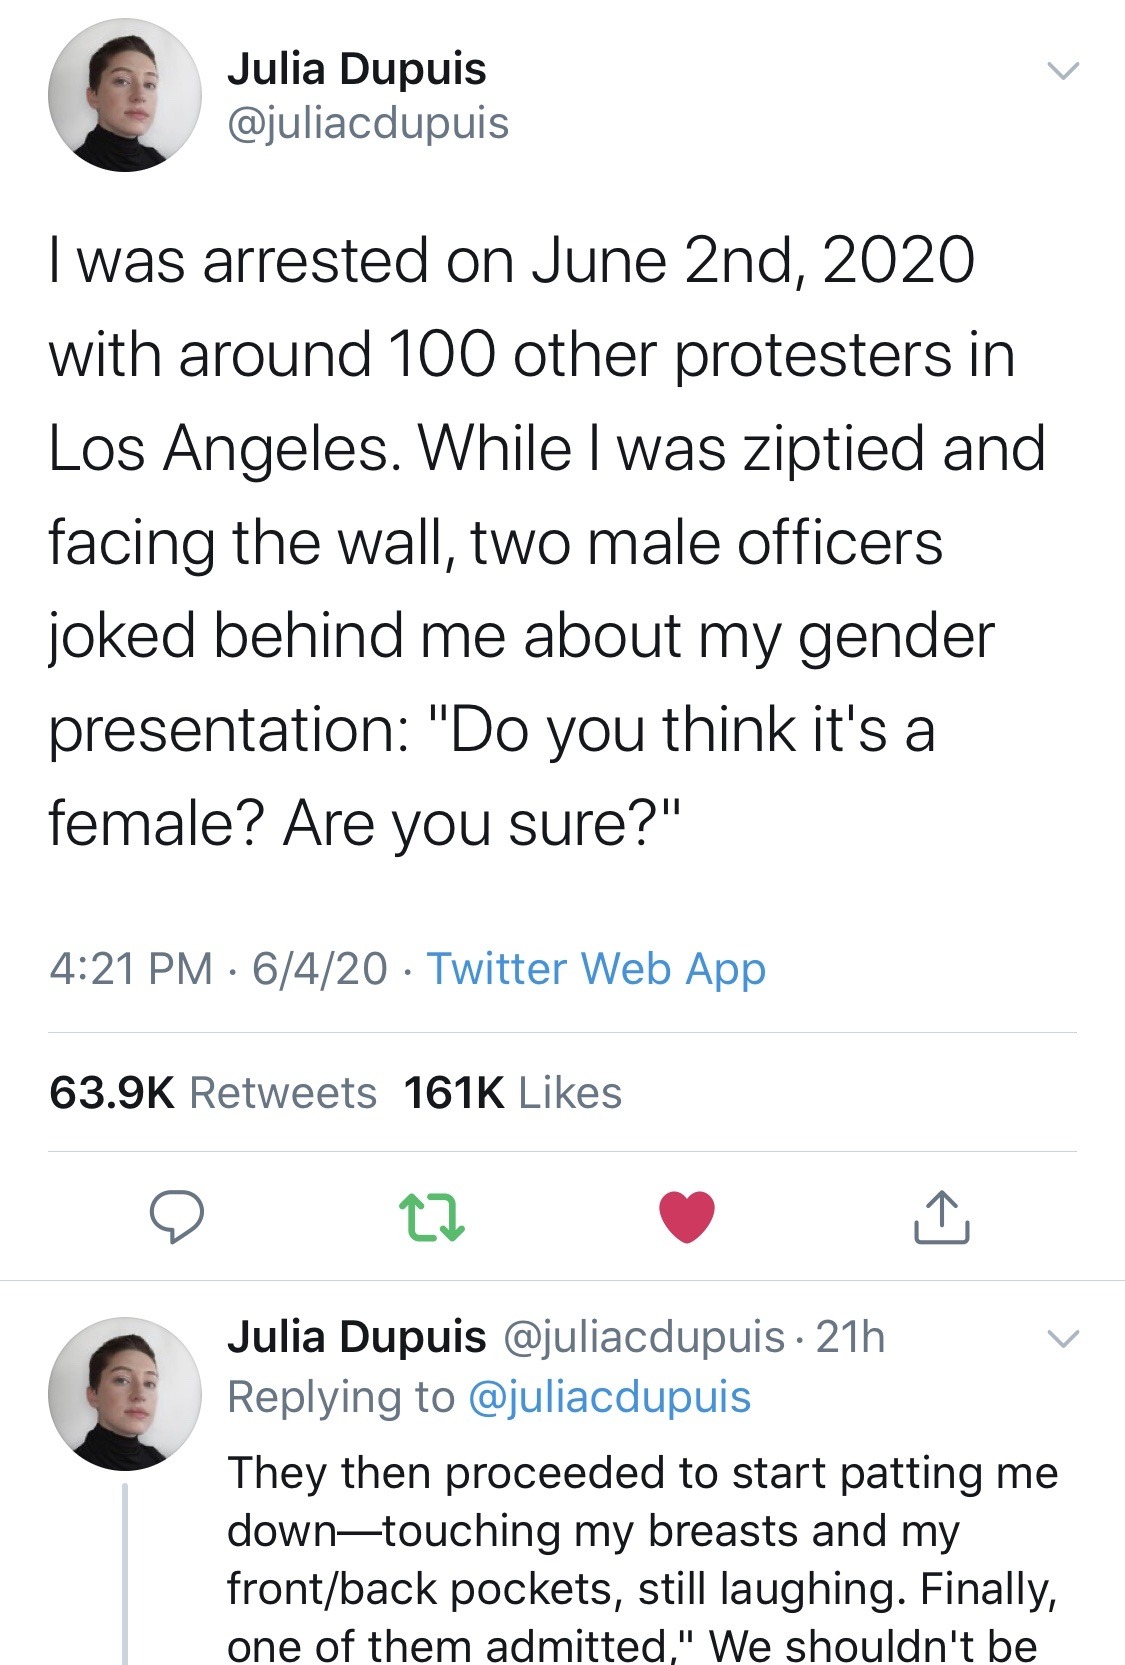 Julia Dupuis I was arrested on June 2nd, 2020 with around 100 other protesters in Los Angeles. While I was ziptied and facing the wall, two male officers joked behind me about my gender presentation "Do you think it's a female? Are you sure?" 6420 Twitter